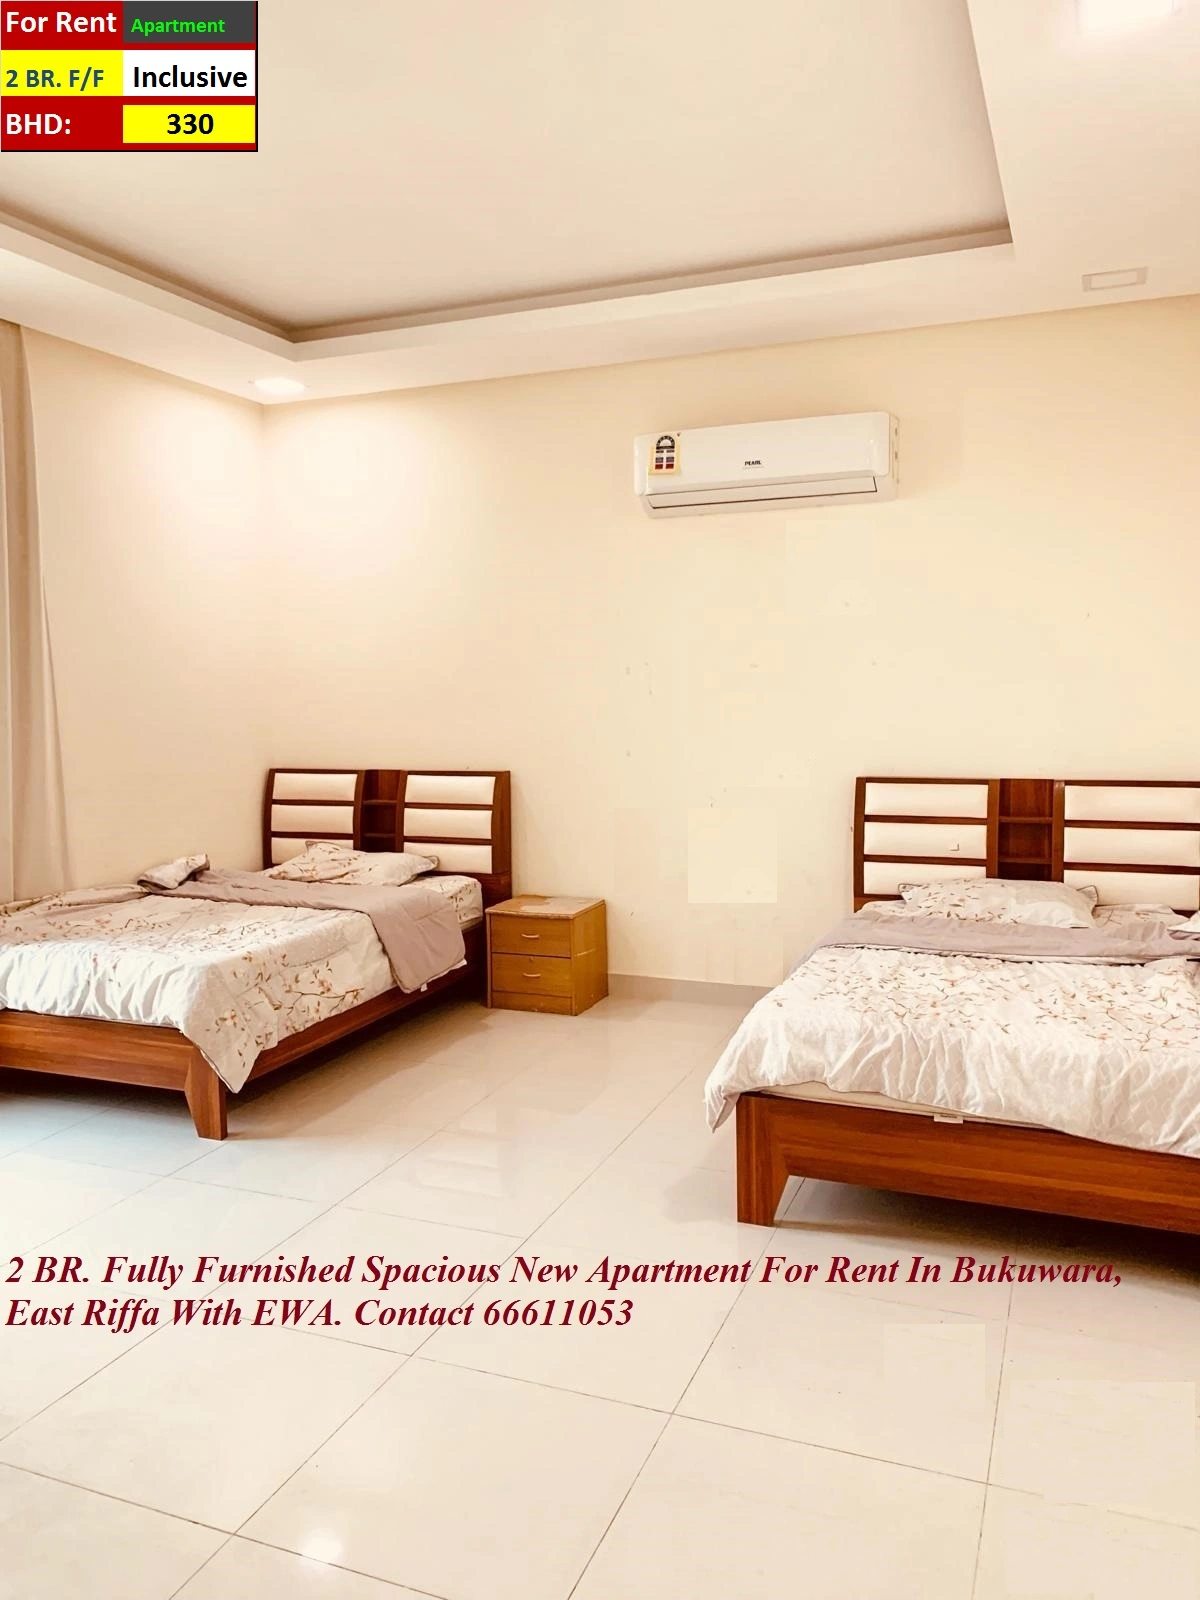 2 BR.Fully Furnished Spacious New Apartment for Rent in Bukuwara,Riffa